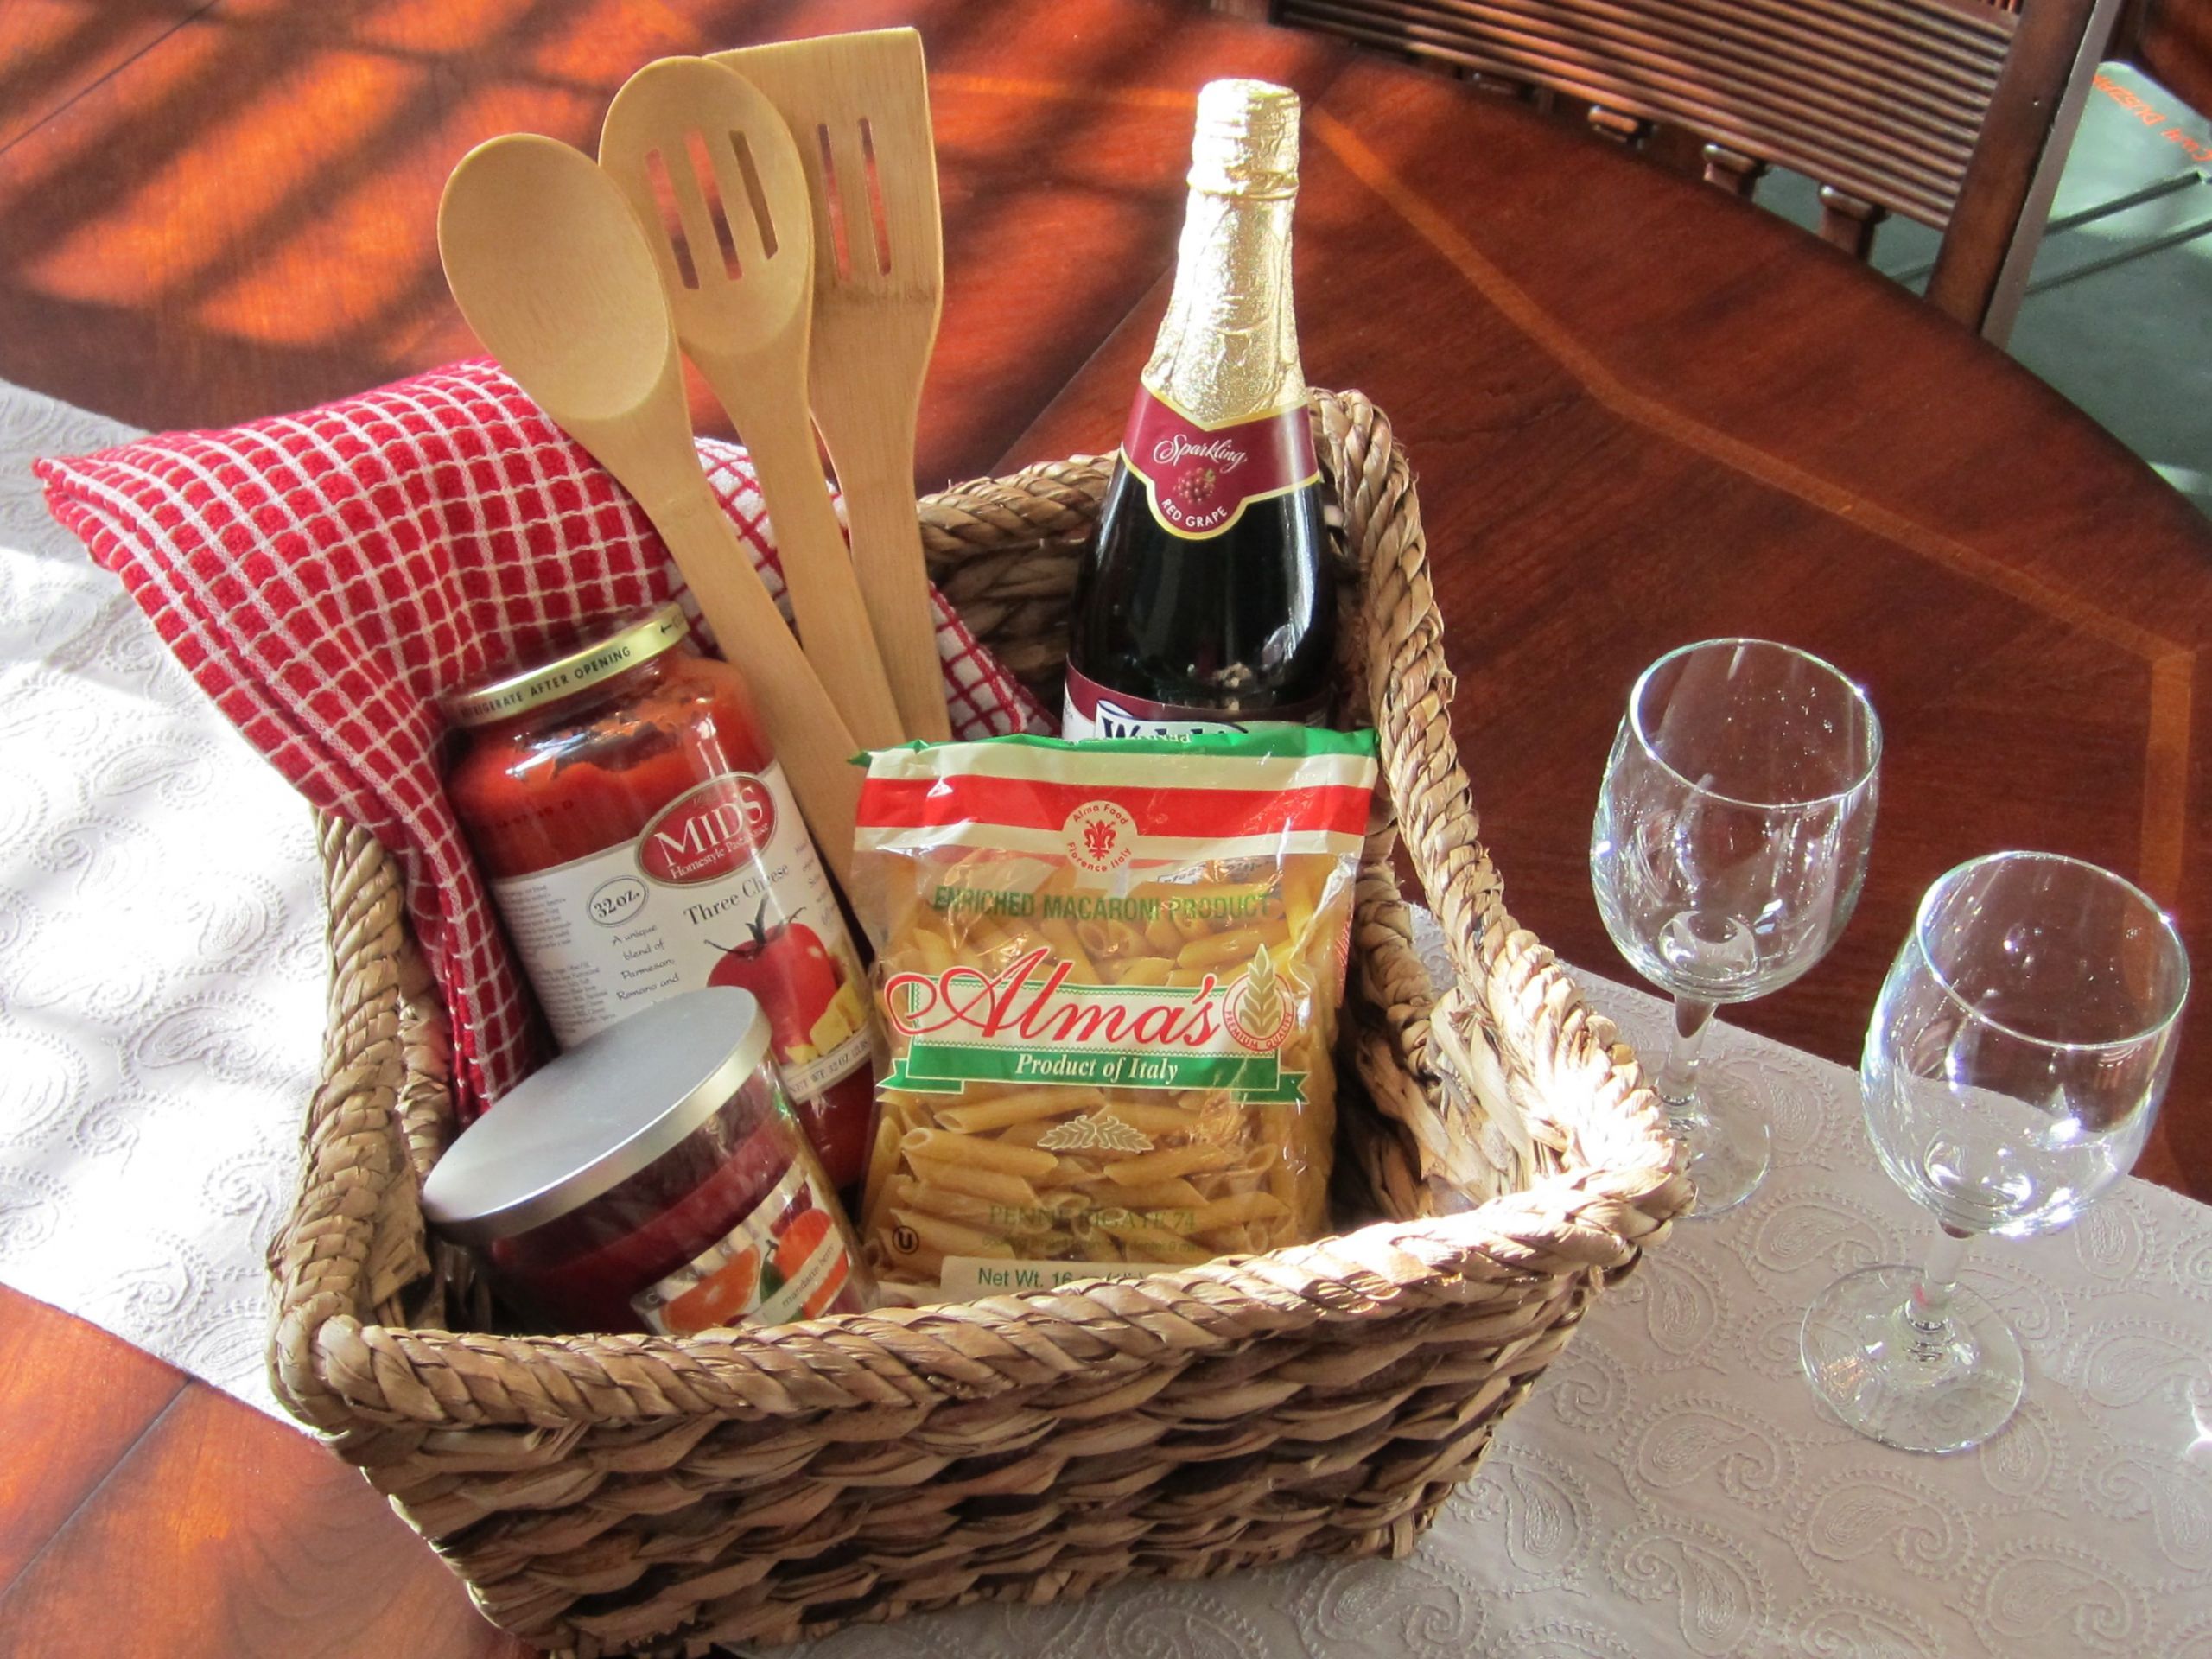 Dinner Gift Basket Ideas
 Italian dinner for two t basket Add a baguette and a